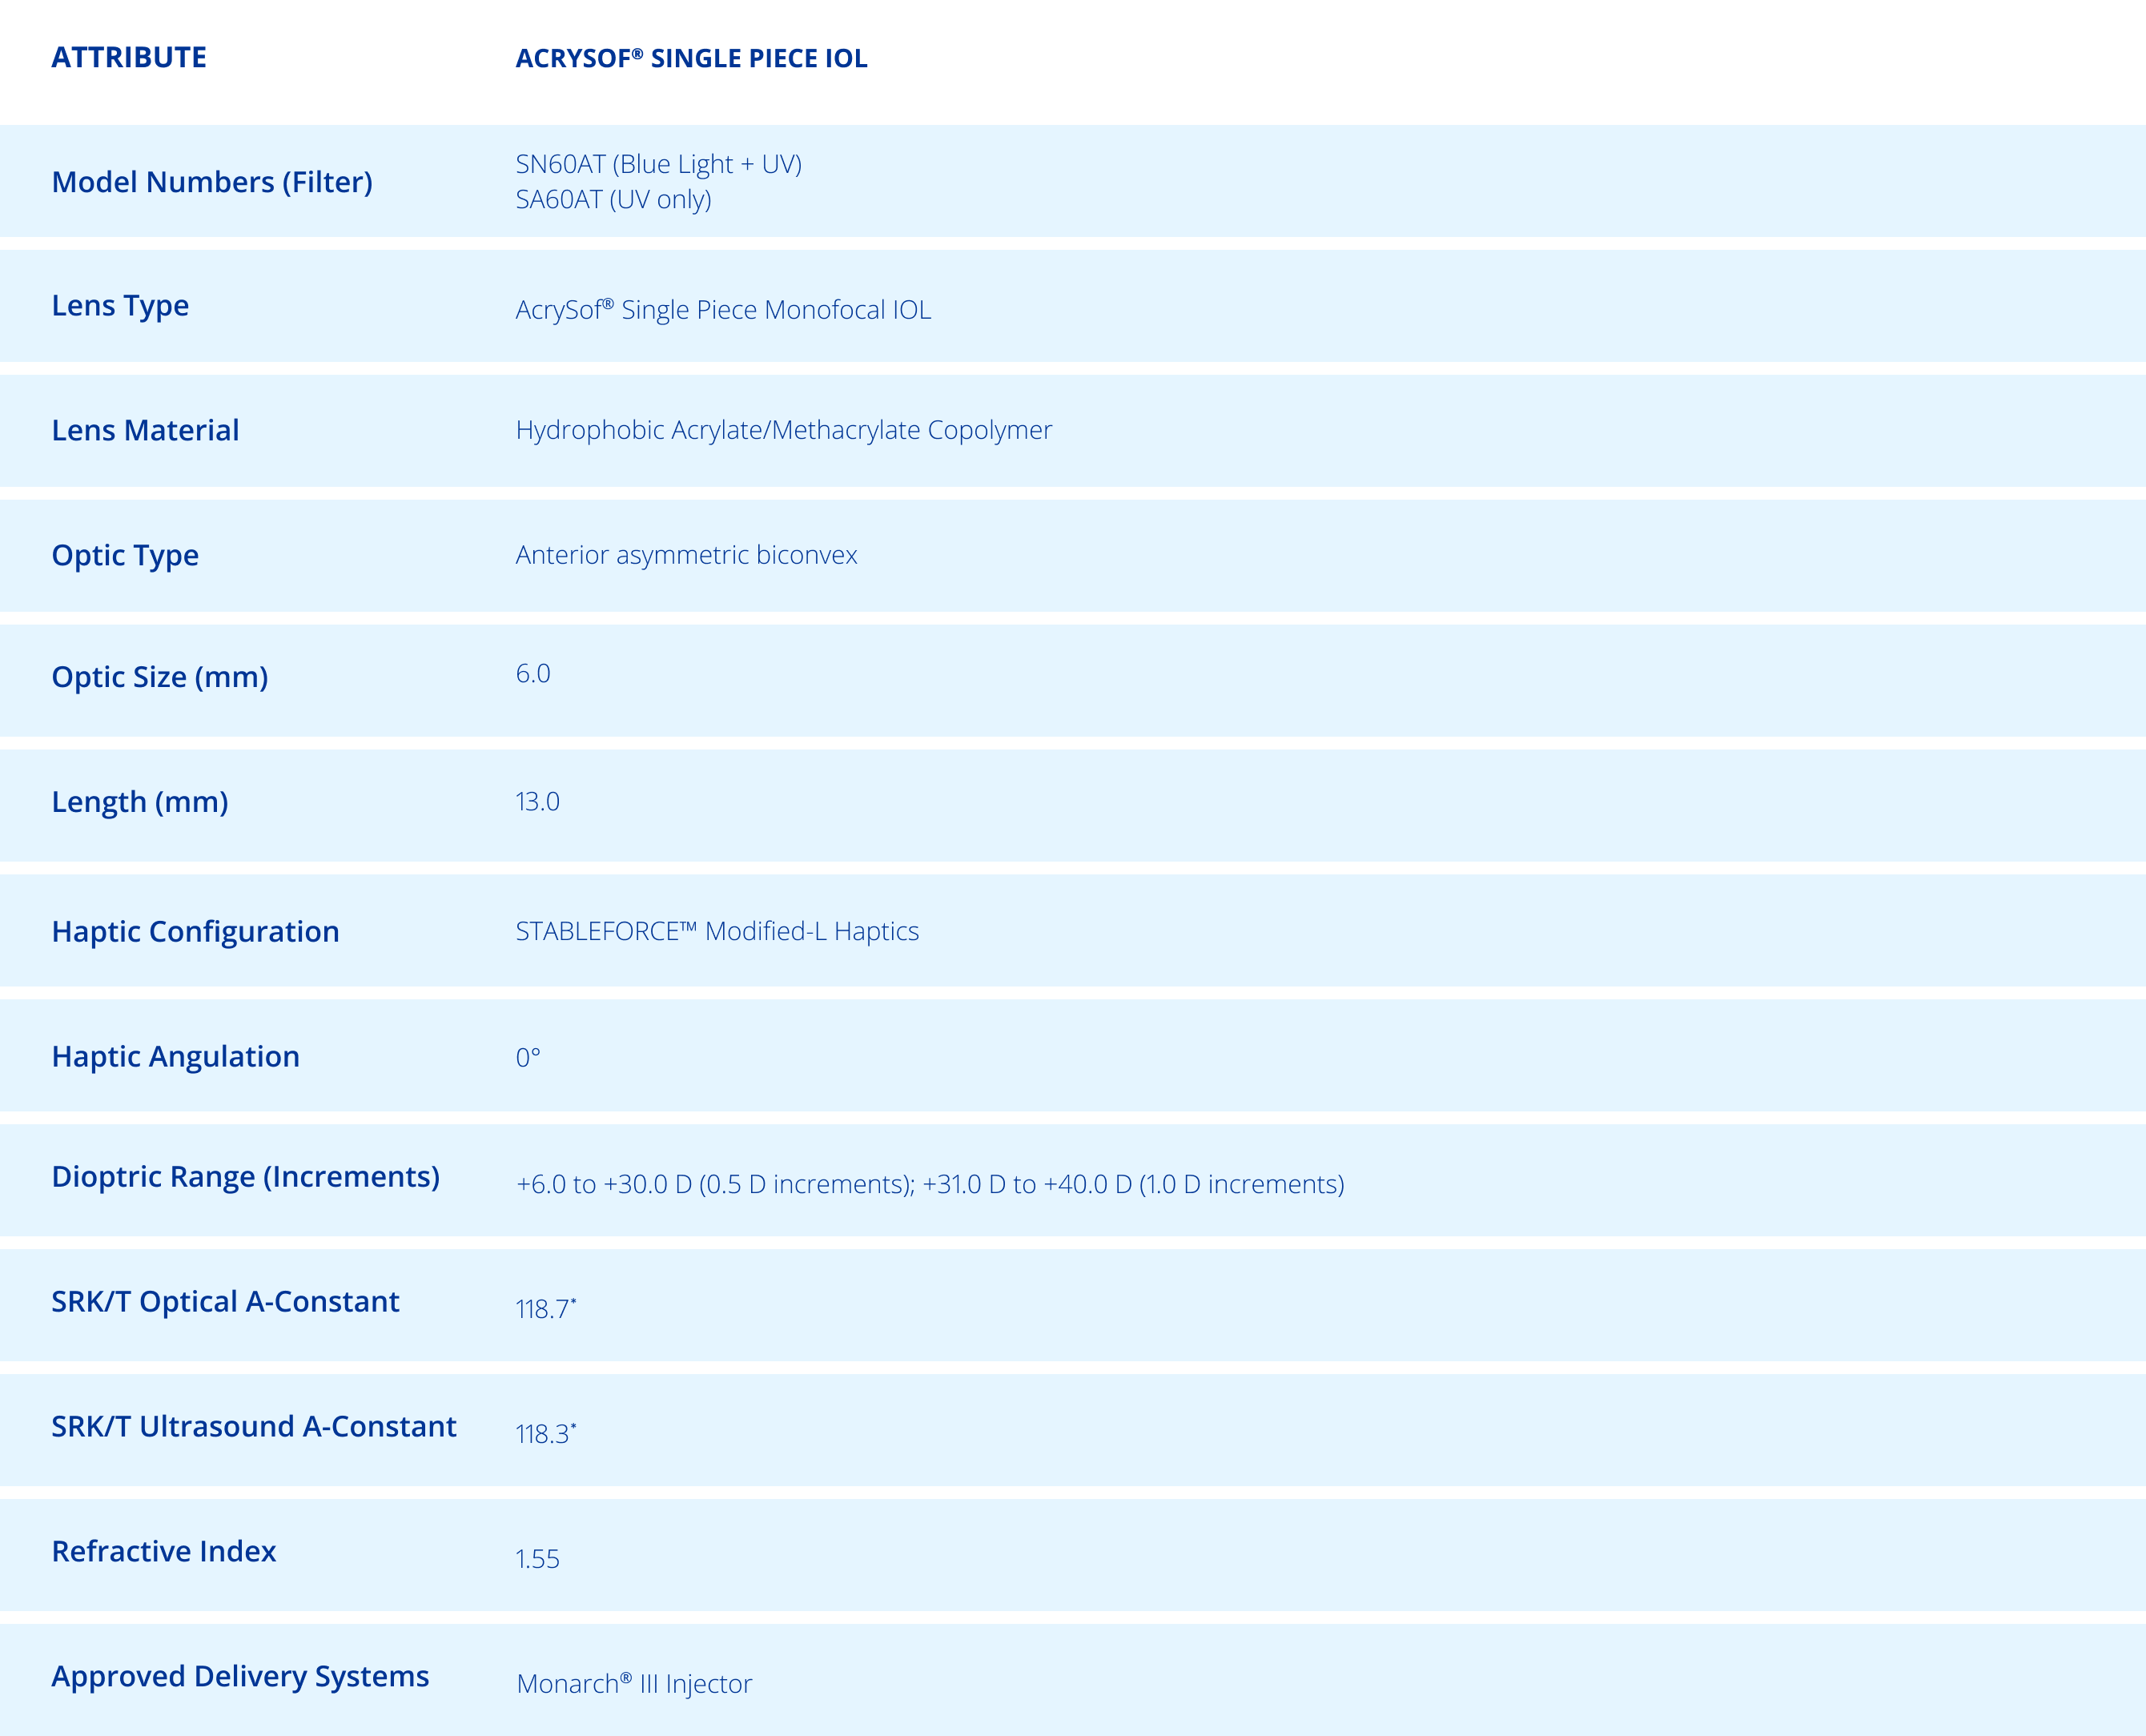 Specification table of acrysof® single piece